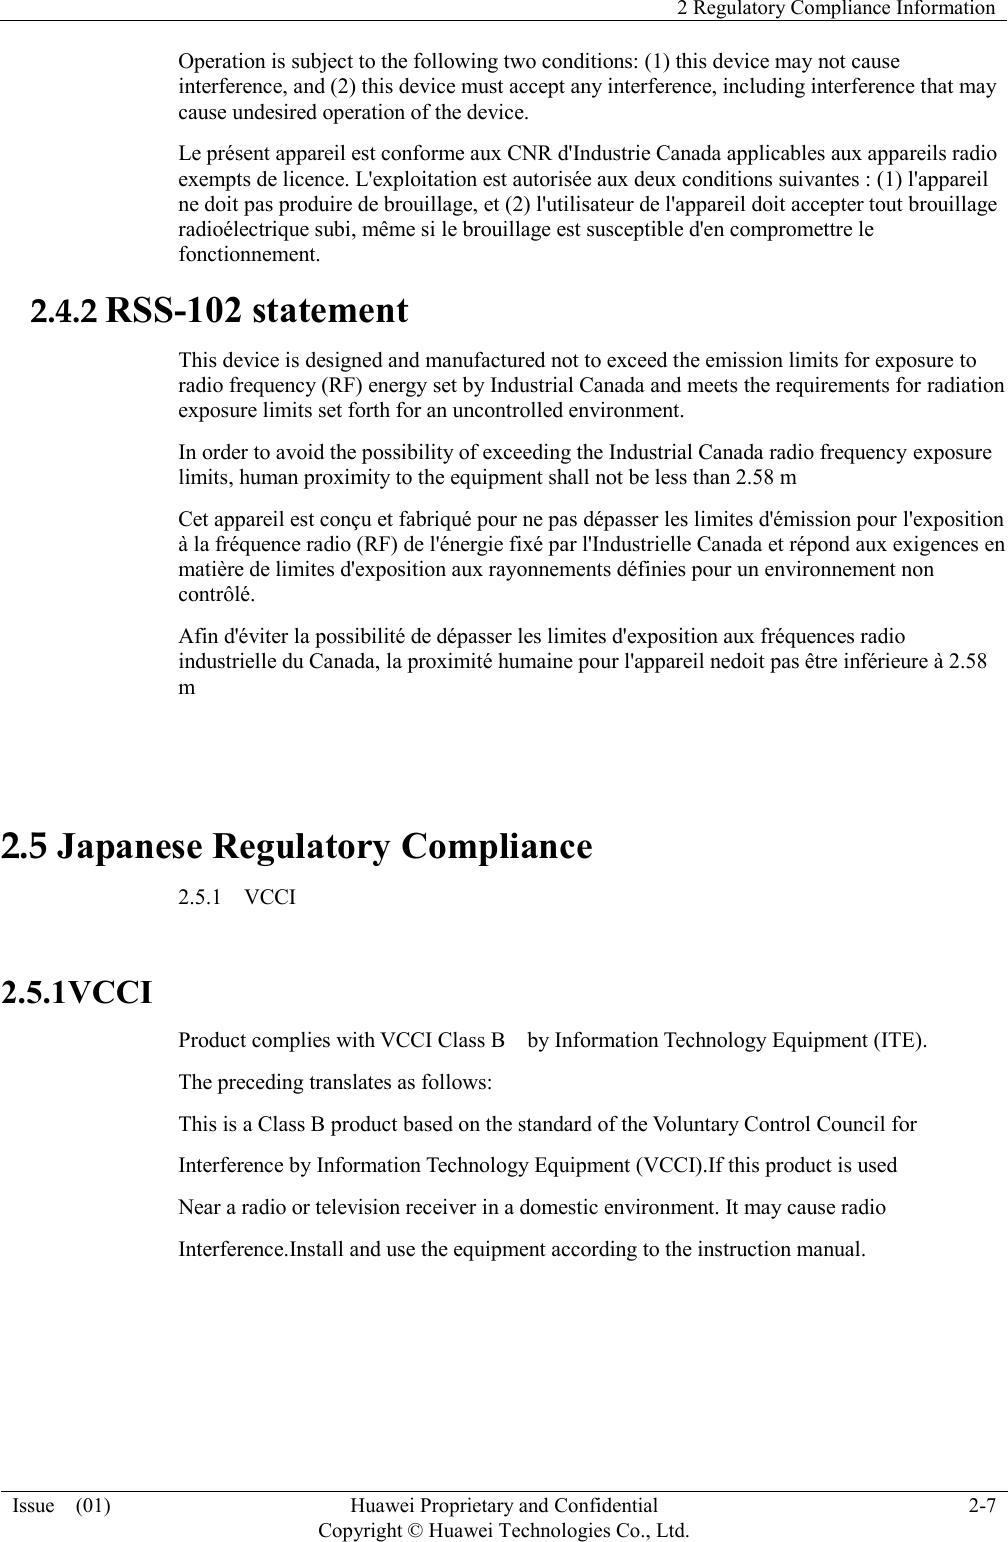   2 Regulatory Compliance Information  Issue    (01) Huawei Proprietary and Confidential                                     Copyright © Huawei Technologies Co., Ltd. 2-7  Operation is subject to the following two conditions: (1) this device may not cause interference, and (2) this device must accept any interference, including interference that may cause undesired operation of the device. Le présent appareil est conforme aux CNR d&apos;Industrie Canada applicables aux appareils radio exempts de licence. L&apos;exploitation est autorisée aux deux conditions suivantes : (1) l&apos;appareil ne doit pas produire de brouillage, et (2) l&apos;utilisateur de l&apos;appareil doit accepter tout brouillage radioélectrique subi, même si le brouillage est susceptible d&apos;en compromettre le fonctionnement. 2.4.2 RSS-102 statement This device is designed and manufactured not to exceed the emission limits for exposure to radio frequency (RF) energy set by Industrial Canada and meets the requirements for radiation exposure limits set forth for an uncontrolled environment. In order to avoid the possibility of exceeding the Industrial Canada radio frequency exposure limits, human proximity to the equipment shall not be less than 2.58 m Cet appareil est conçu et fabriqué pour ne pas dépasser les limites d&apos;émission pour l&apos;exposition à la fréquence radio (RF) de l&apos;énergie fixé par l&apos;Industrielle Canada et répond aux exigences en matière de limites d&apos;exposition aux rayonnements définies pour un environnement non contrôlé.   Afin d&apos;éviter la possibilité de dépasser les limites d&apos;exposition aux fréquences radio industrielle du Canada, la proximité humaine pour l&apos;appareil nedoit pas être inférieure à 2.58 m  2.5 Japanese Regulatory Compliance 2.5.1    VCCI  2.5.1VCCI Product complies with VCCI Class B    by Information Technology Equipment (ITE). The preceding translates as follows: This is a Class B product based on the standard of the Voluntary Control Council for Interference by Information Technology Equipment (VCCI).If this product is used Near a radio or television receiver in a domestic environment. It may cause radio Interference.Install and use the equipment according to the instruction manual.   